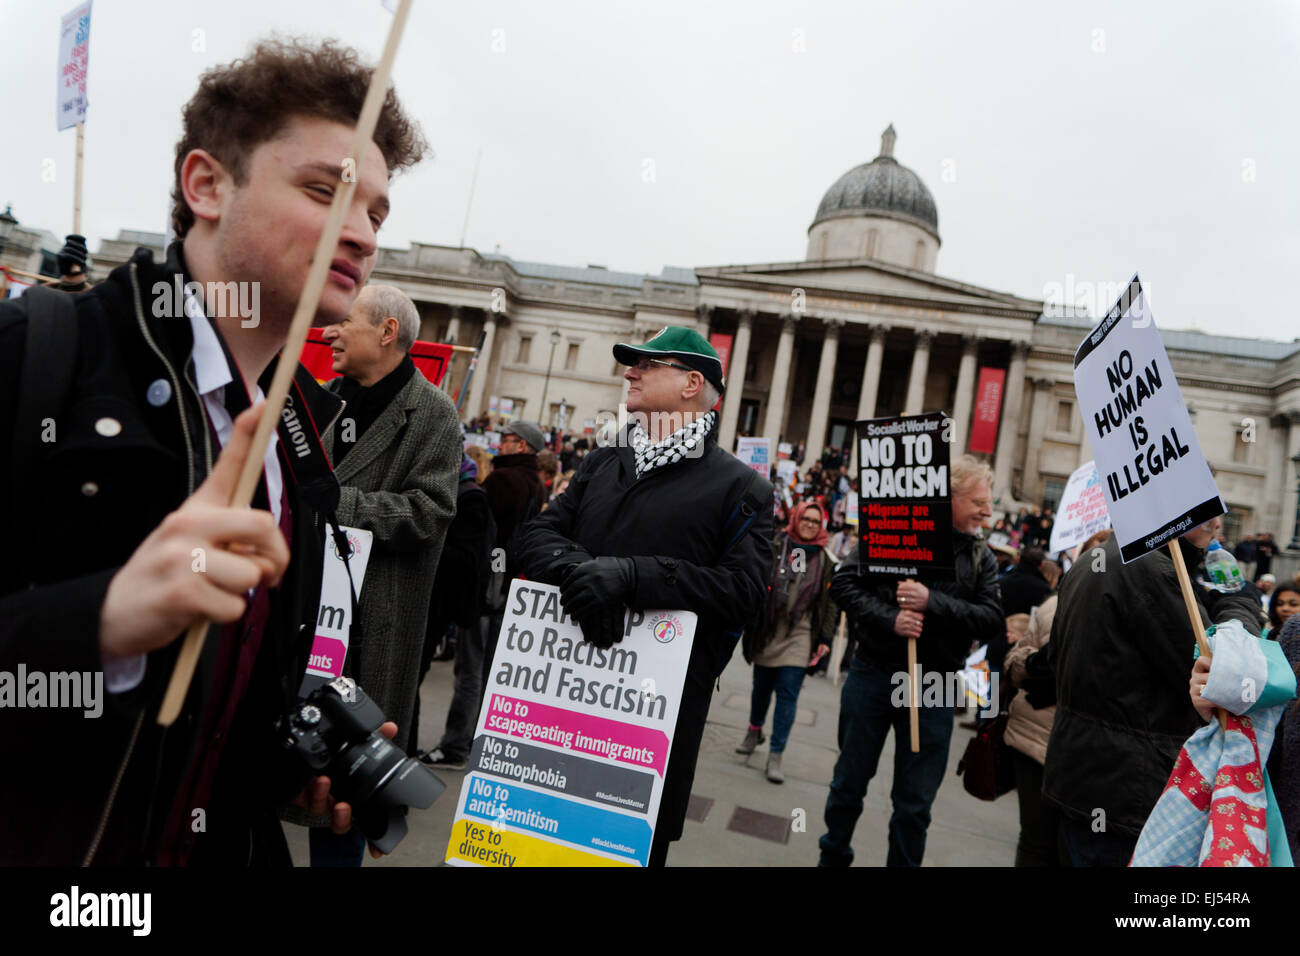 London, UK. 21st March, 2015.  Protester at the Stand up to racism and fascism Protest London,  Credit:  Peter Barbe/Alamy Live News Stock Photo